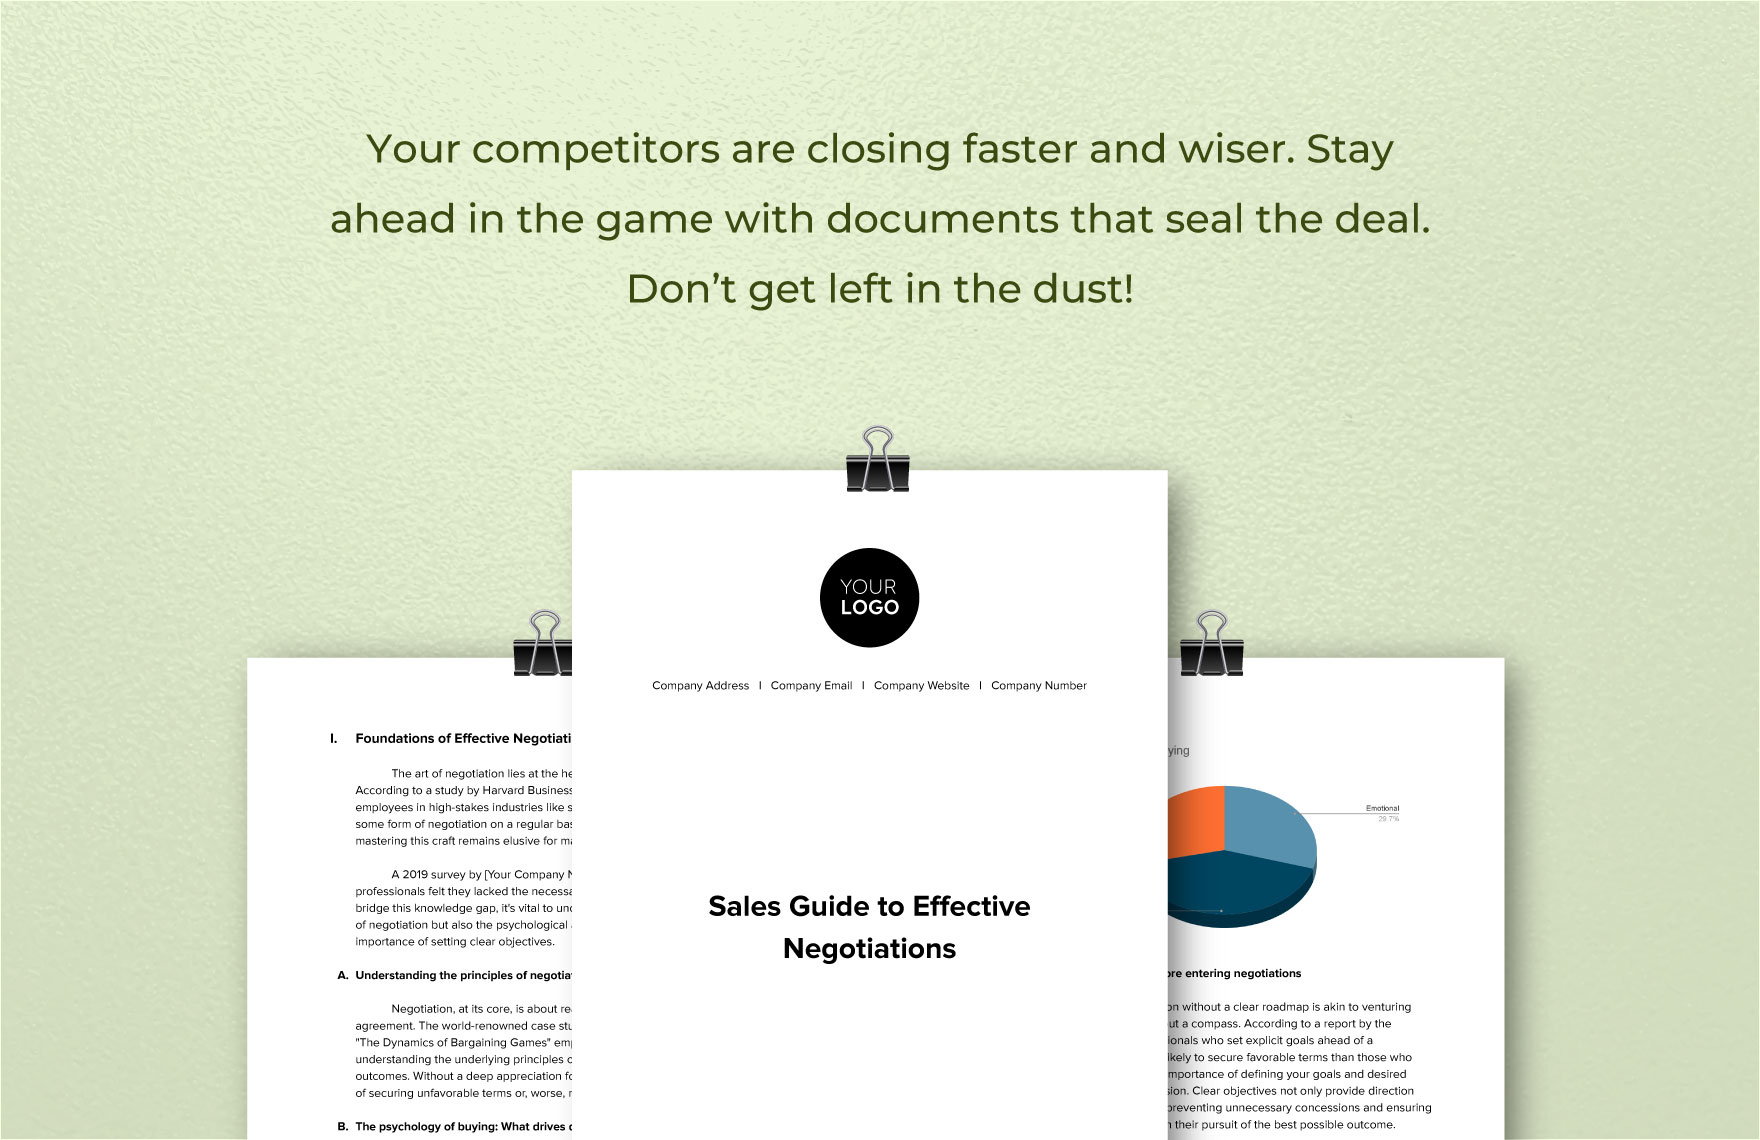 Sales Guide to Effective Negotiations Template